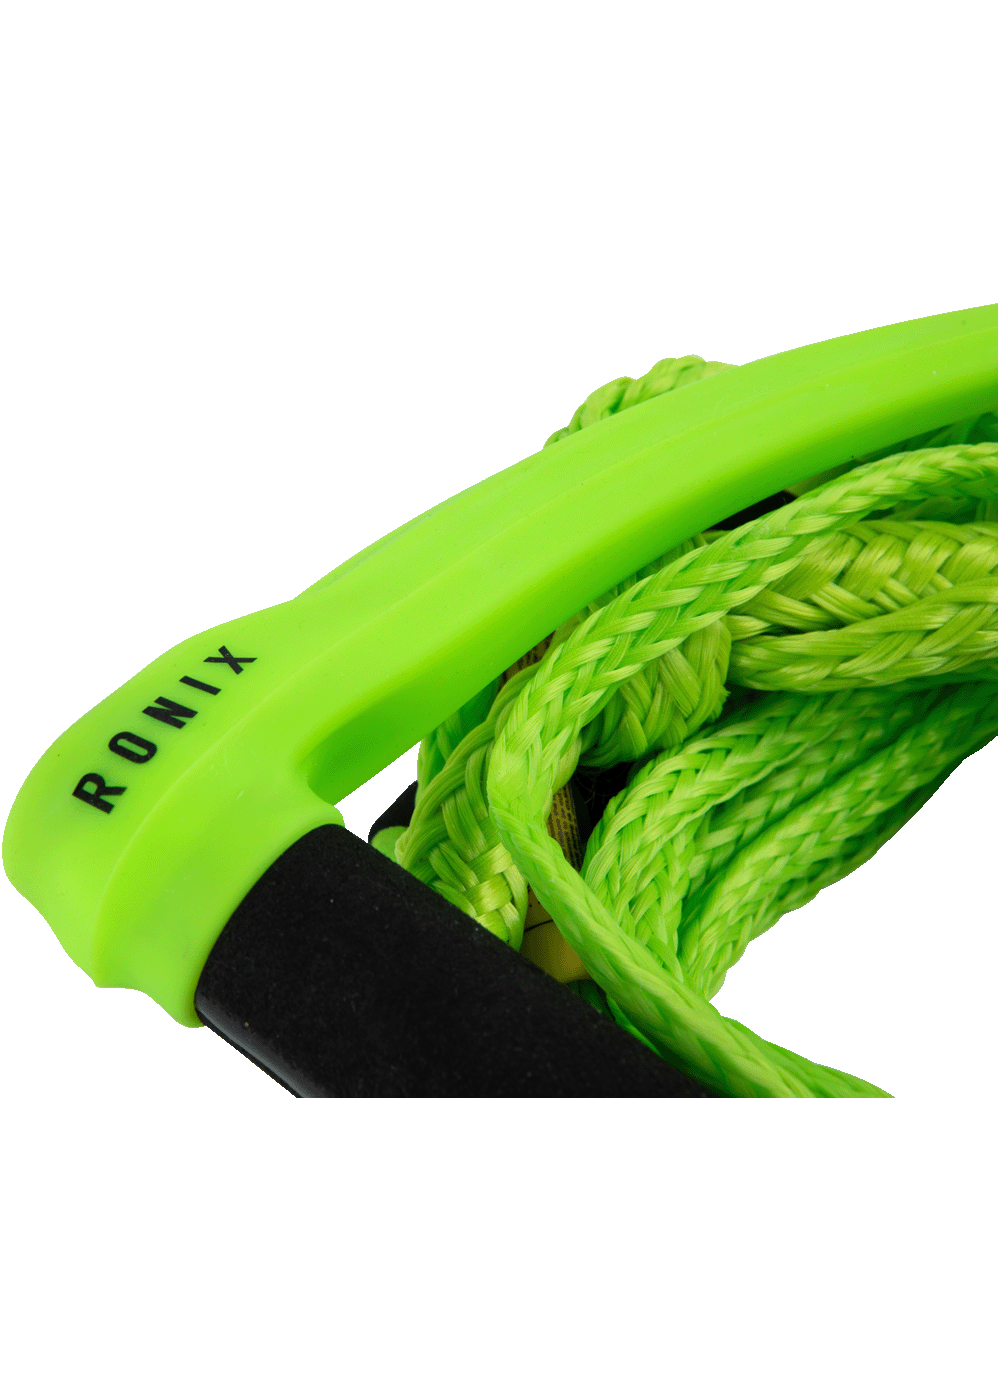 SURF-ROPE-GREEN-INSET-2 copy